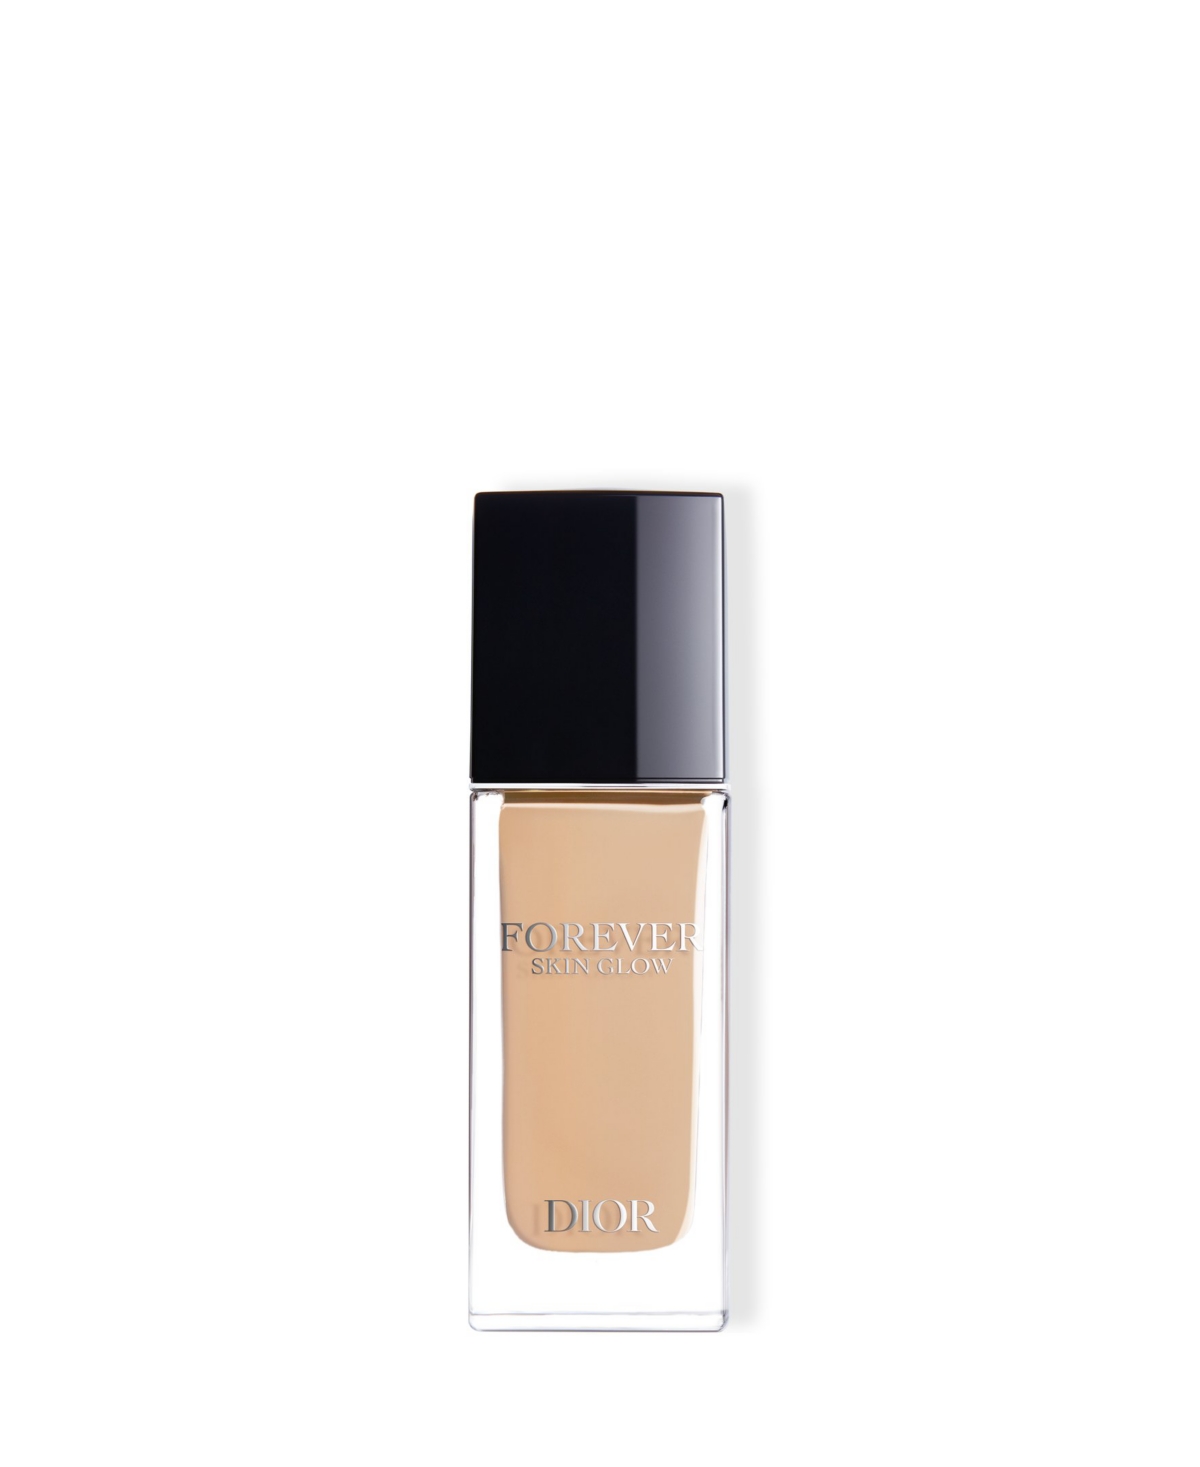 Dior Forever Skin Glow Hydrating Foundation Spf 15 In Warm (fair Skin With Warm Tones)